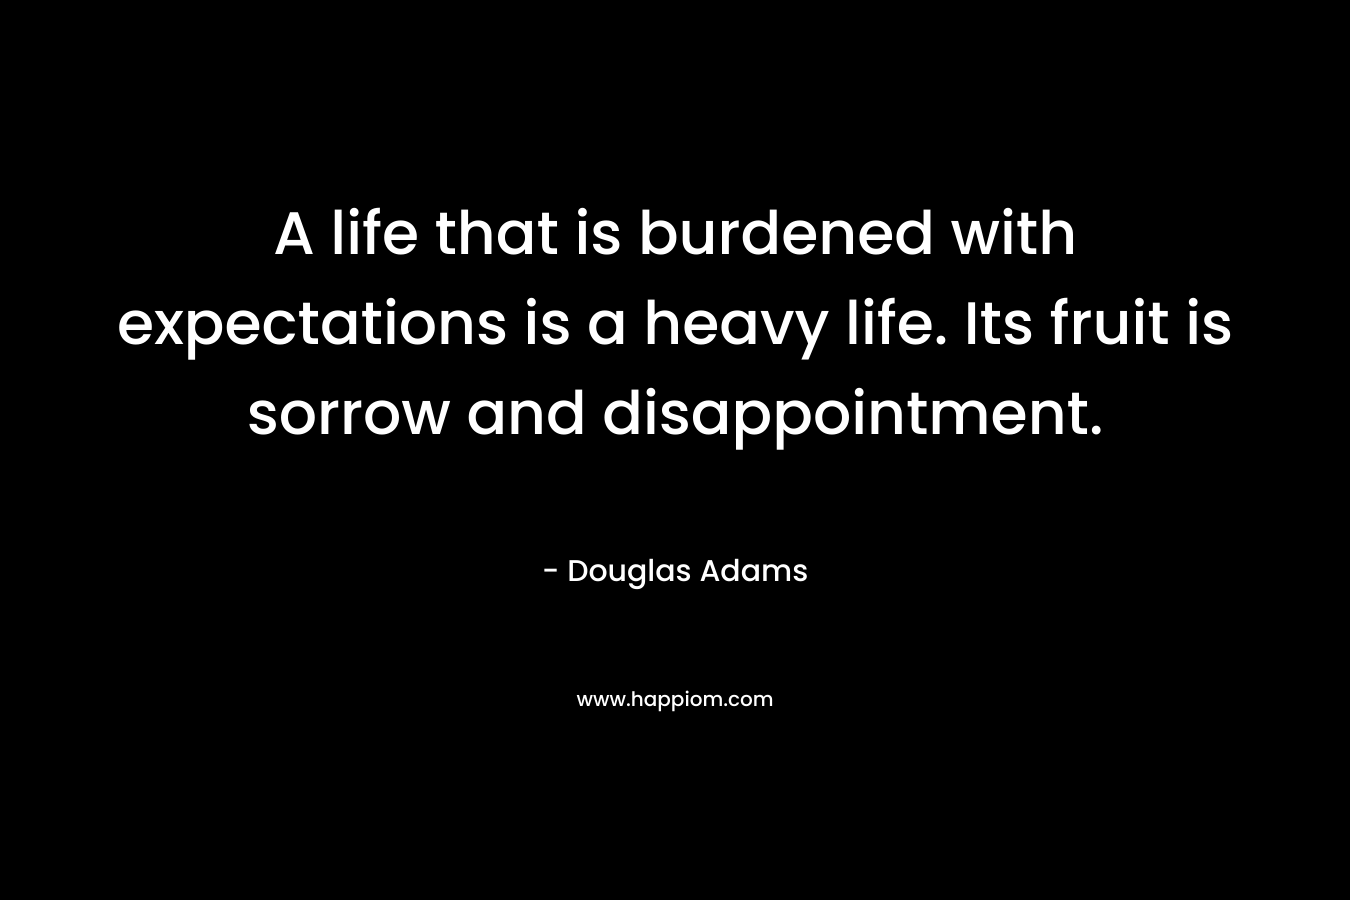 A life that is burdened with expectations is a heavy life. Its fruit is sorrow and disappointment.